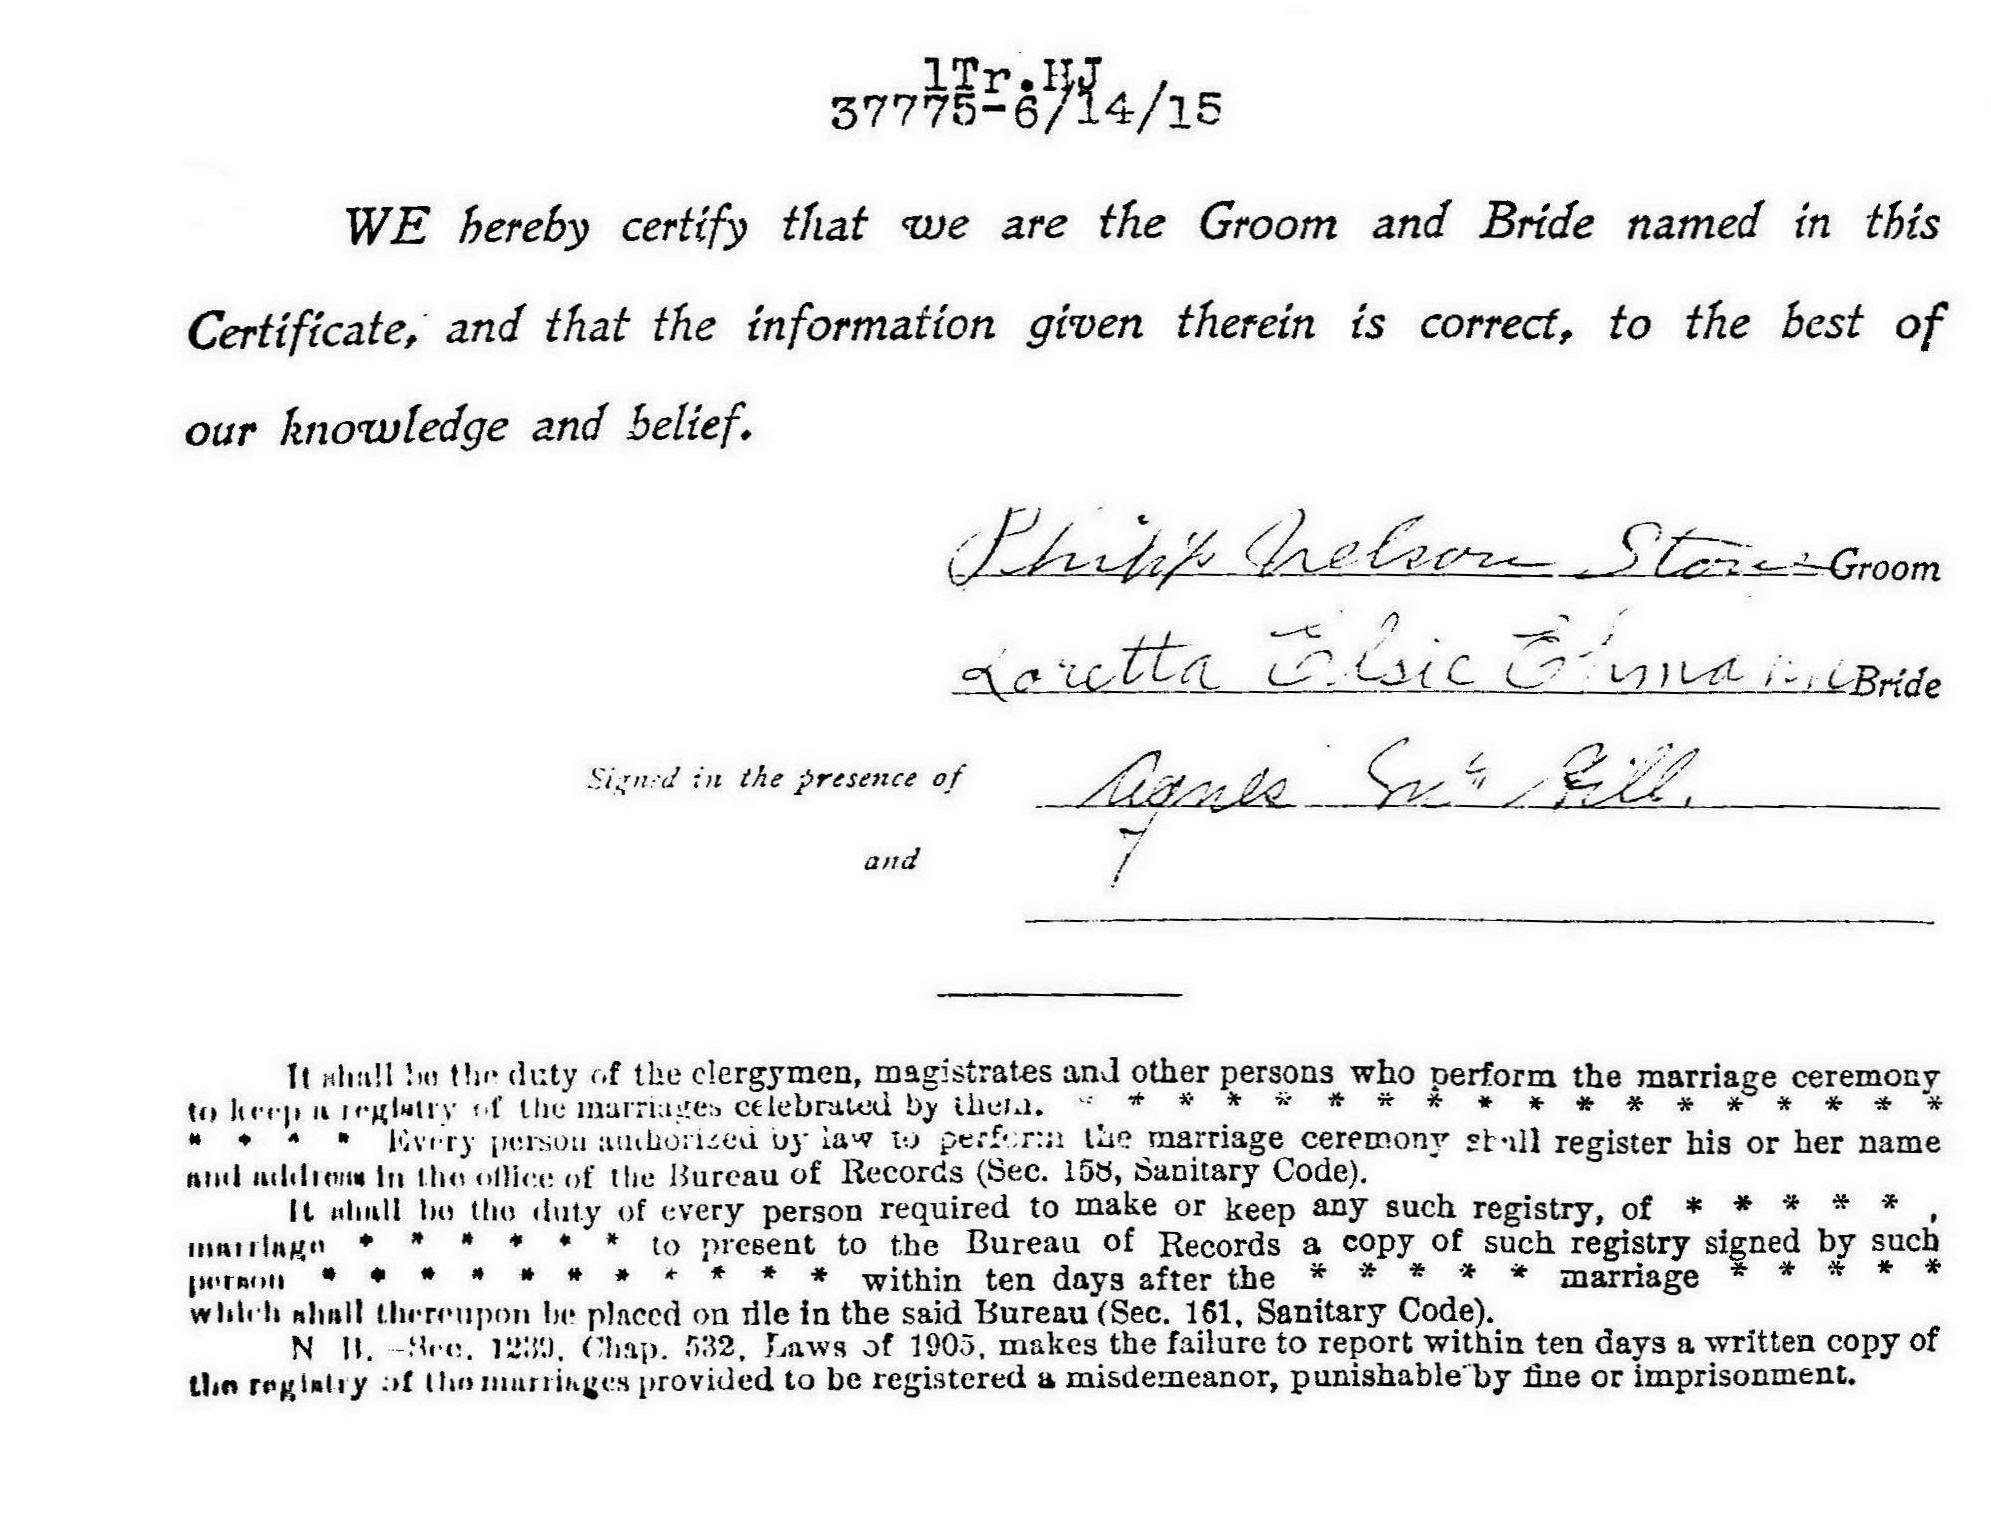 Marriage certificate of Philip Nelson Stone and Loretta Elsie Ehmann, 1914